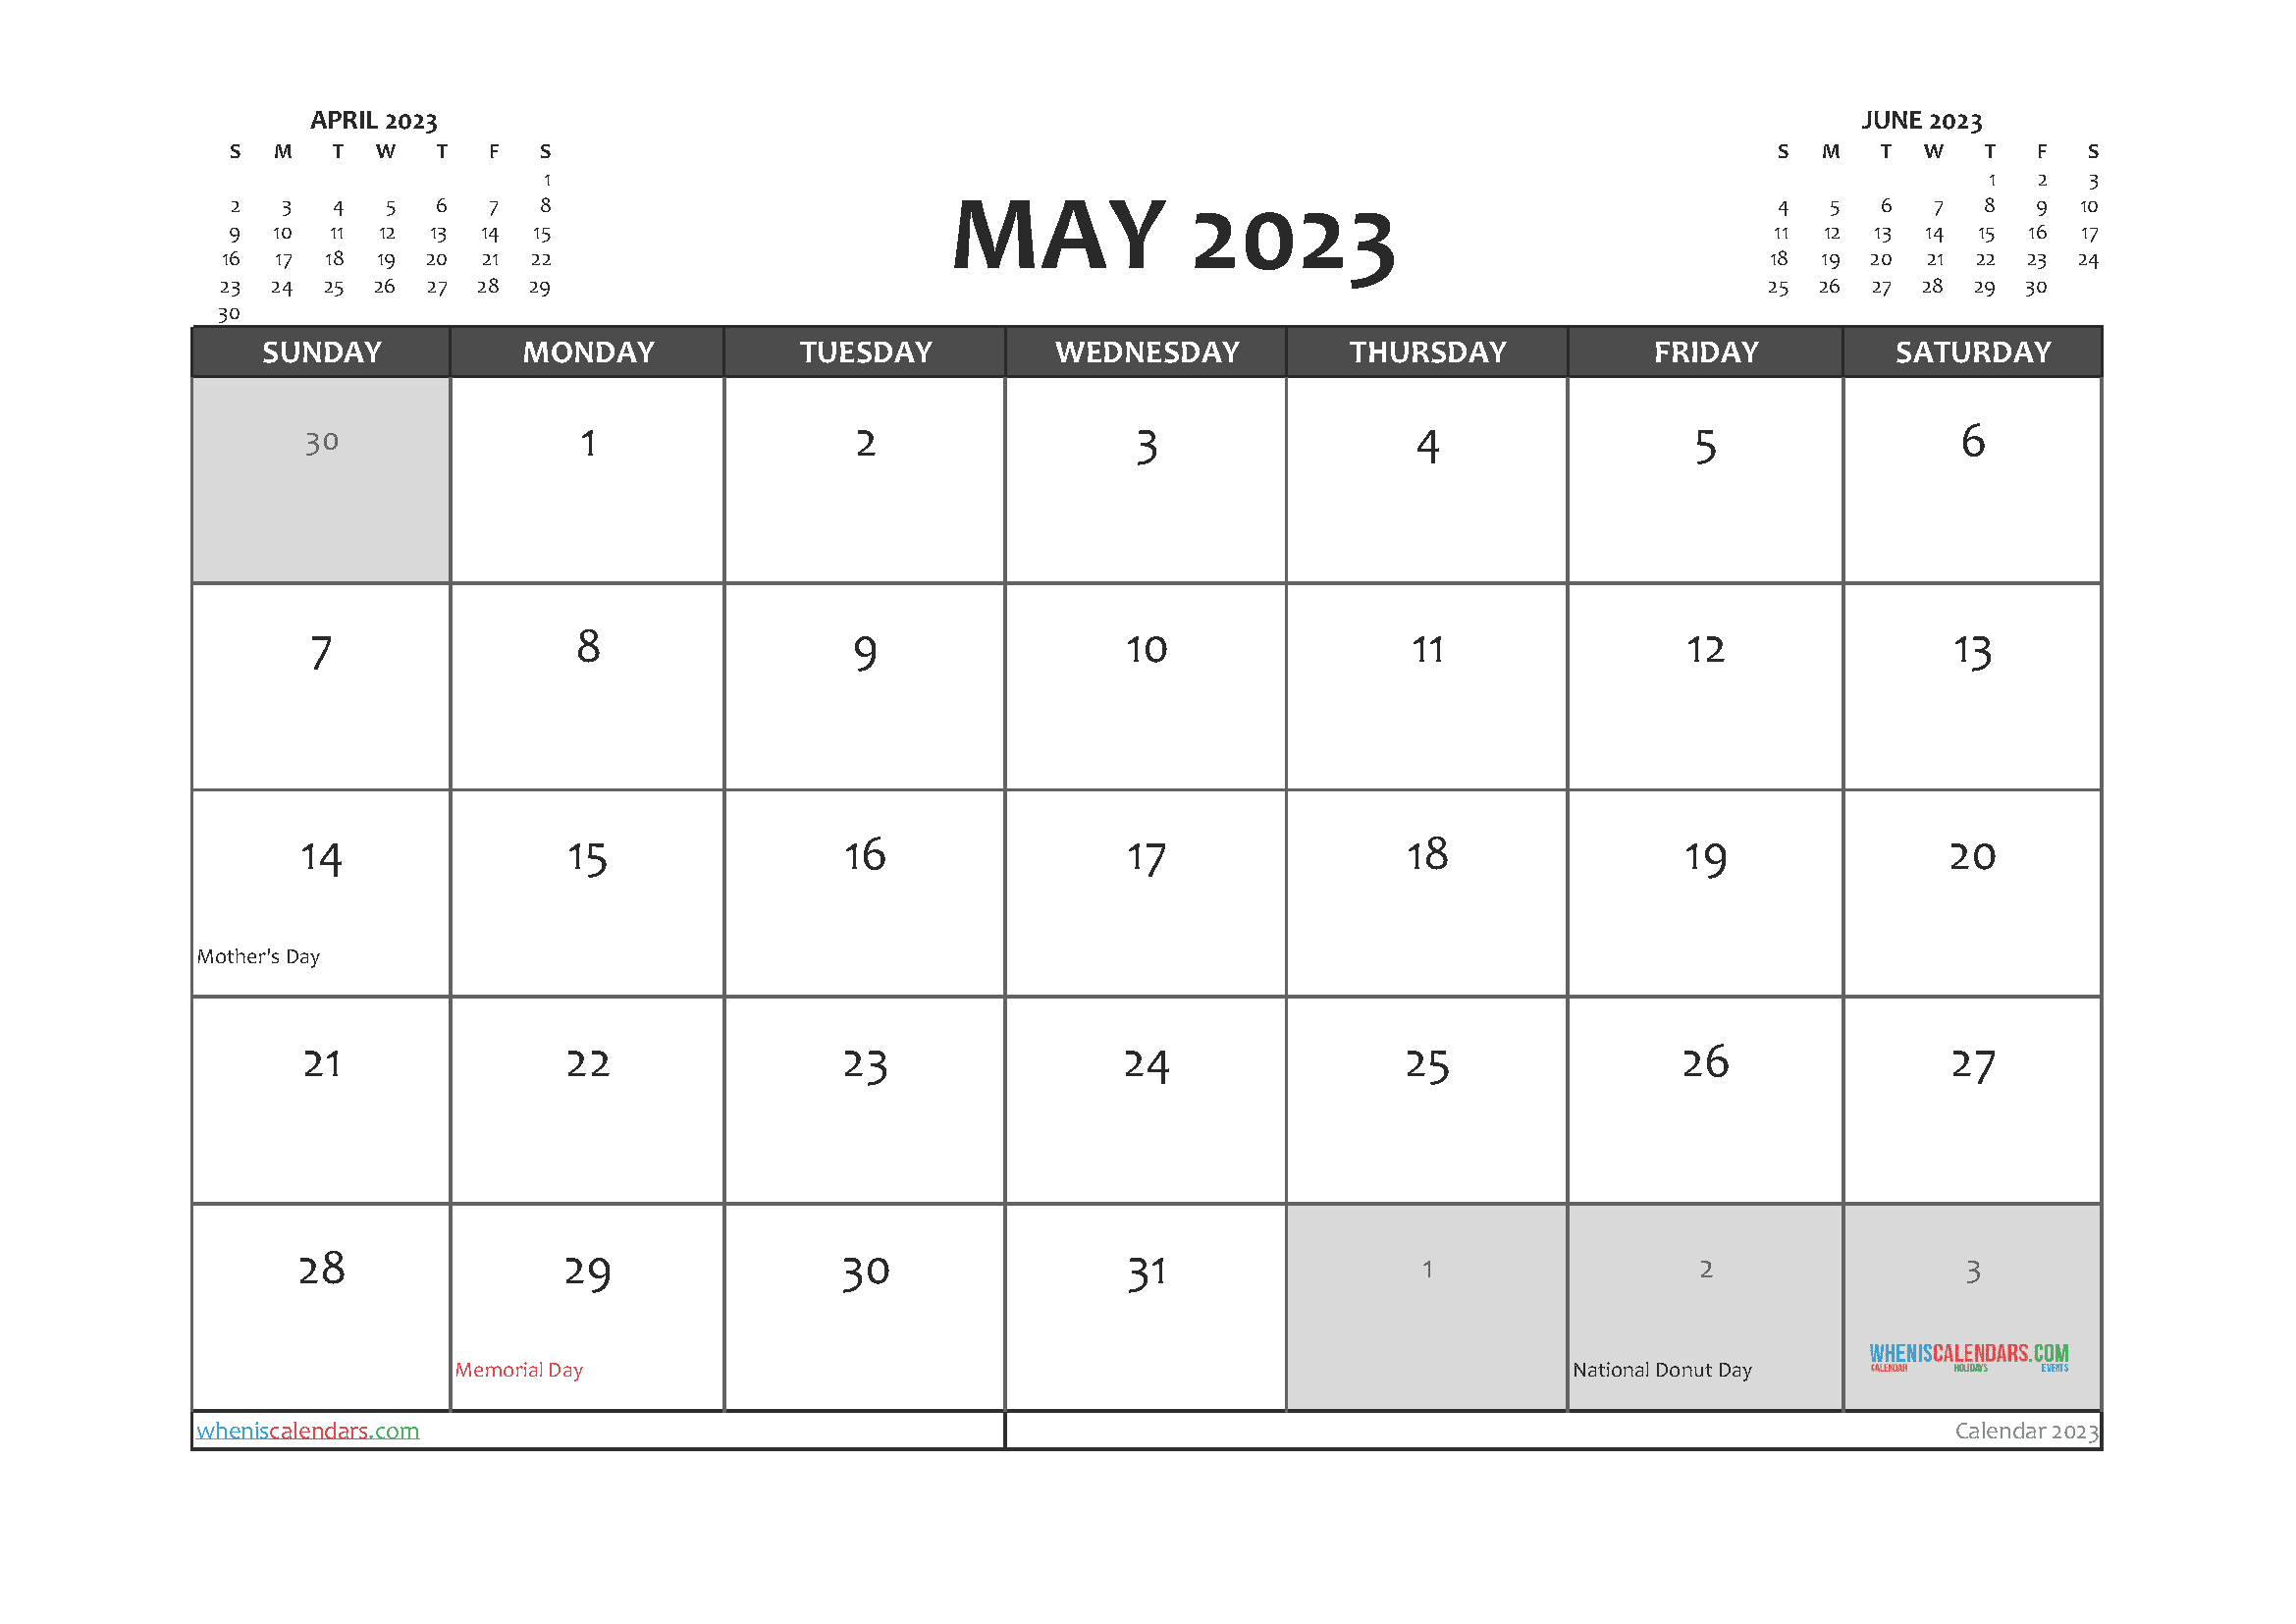 Free Calendar May 2023 with Holidays Printable PDF in Landscape